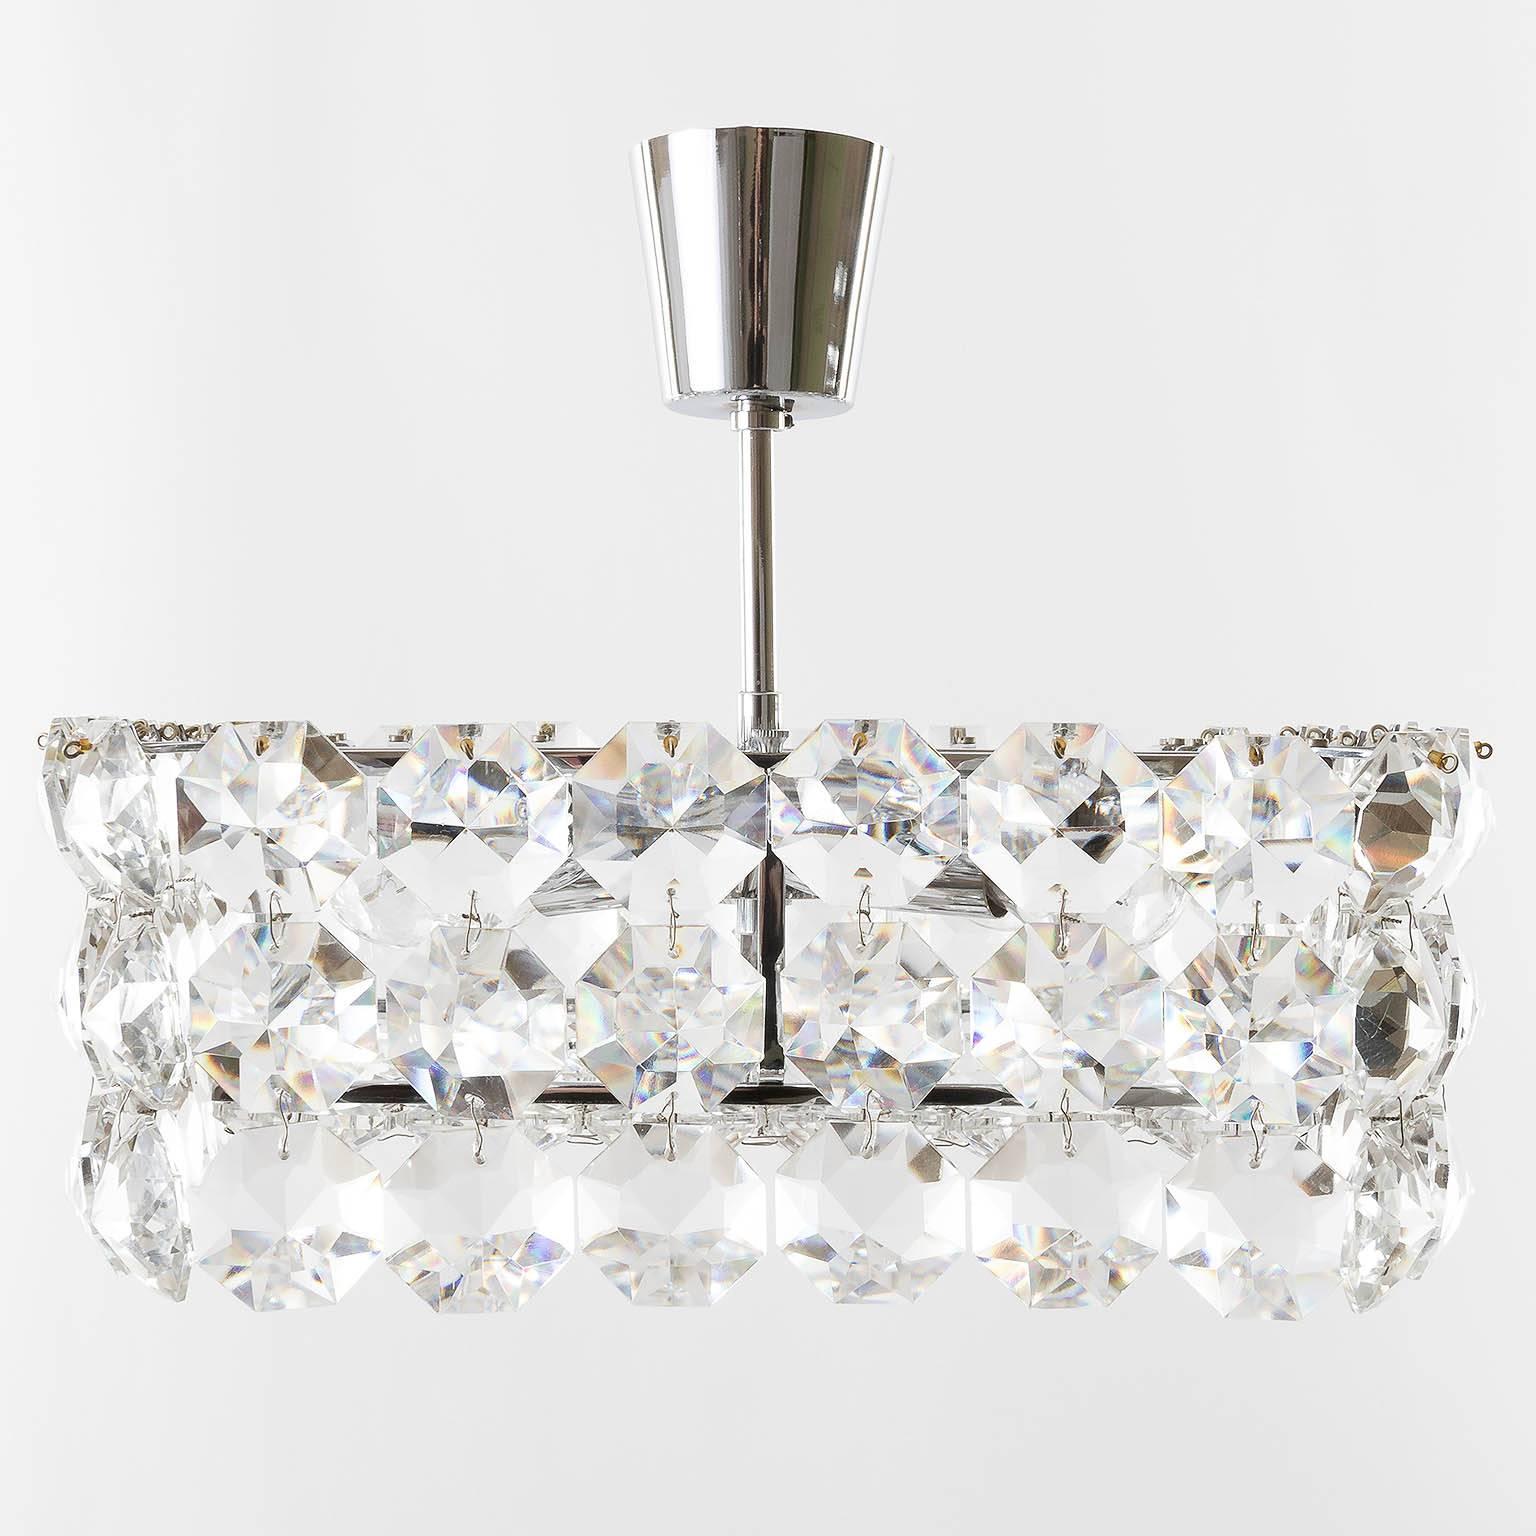 A beautiful chandelier or flush mount lamp by Bakalowits & Sohne, Austria, 1960s. It can be used as chandelier or as flush mount light fixture. We can provide this customizing for your needs without any additional charges.
A handmade and high